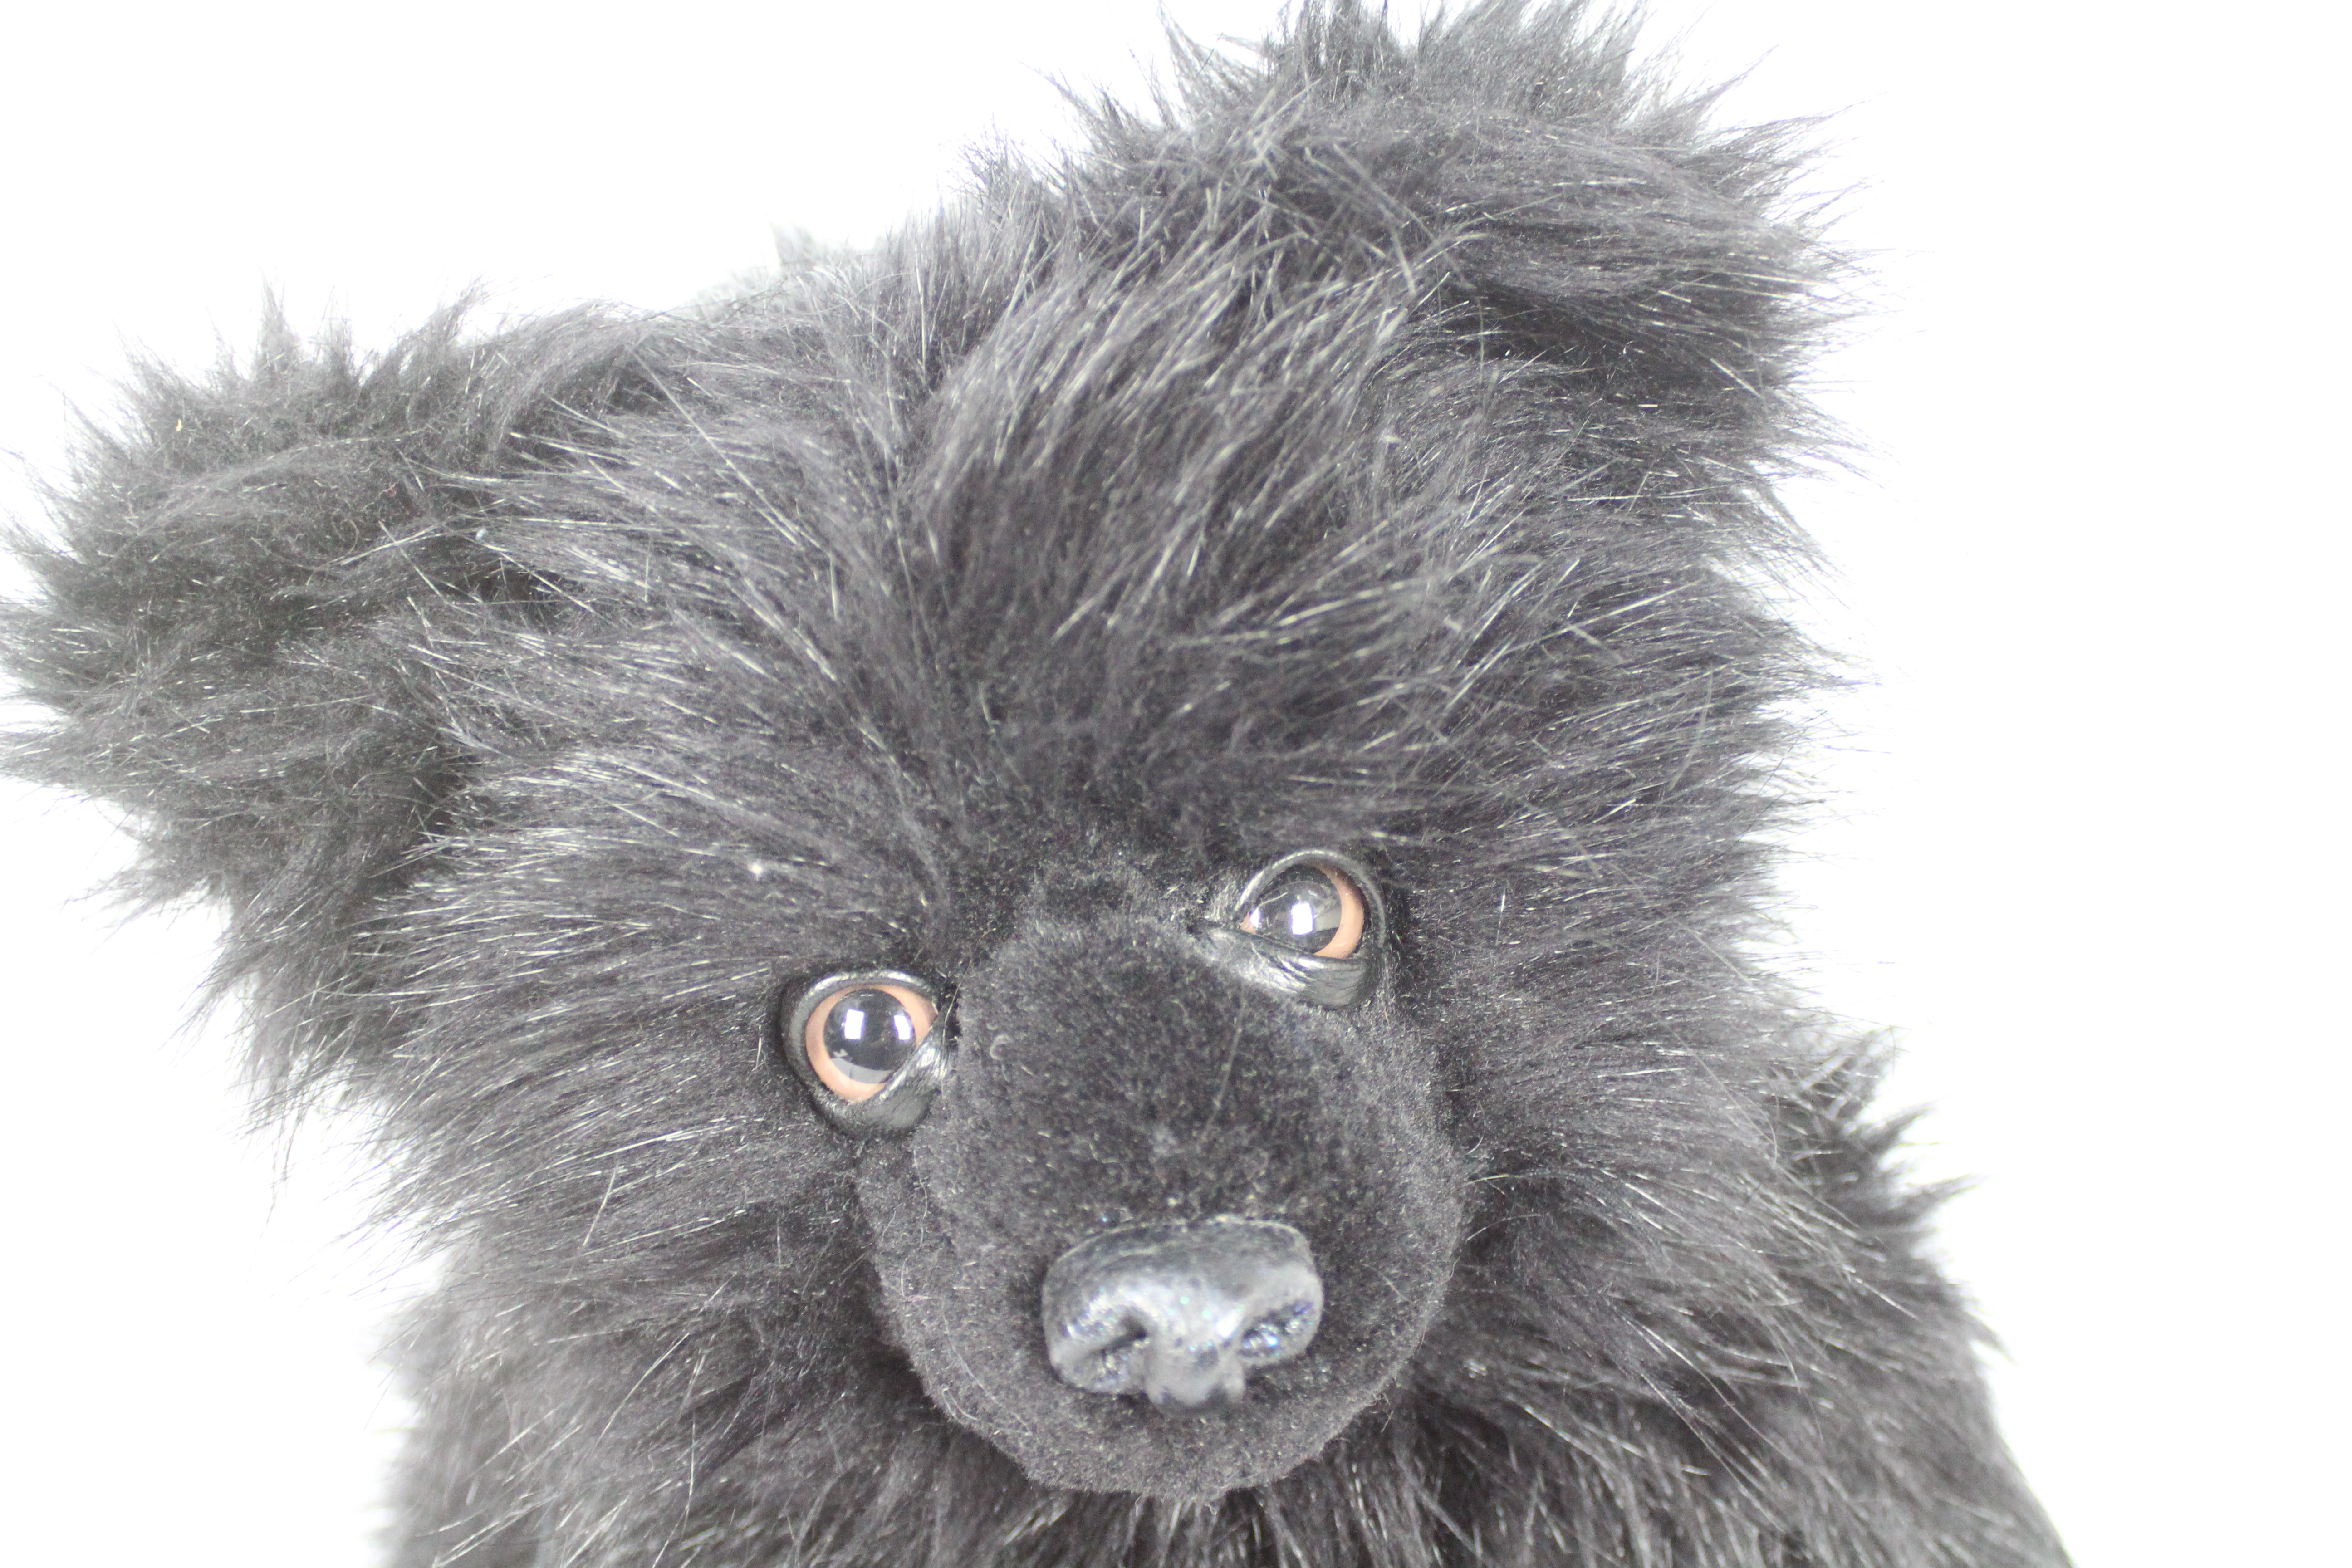 Unknown Maker - A long haired jointed black bear with no makers label visible, - Image 3 of 3